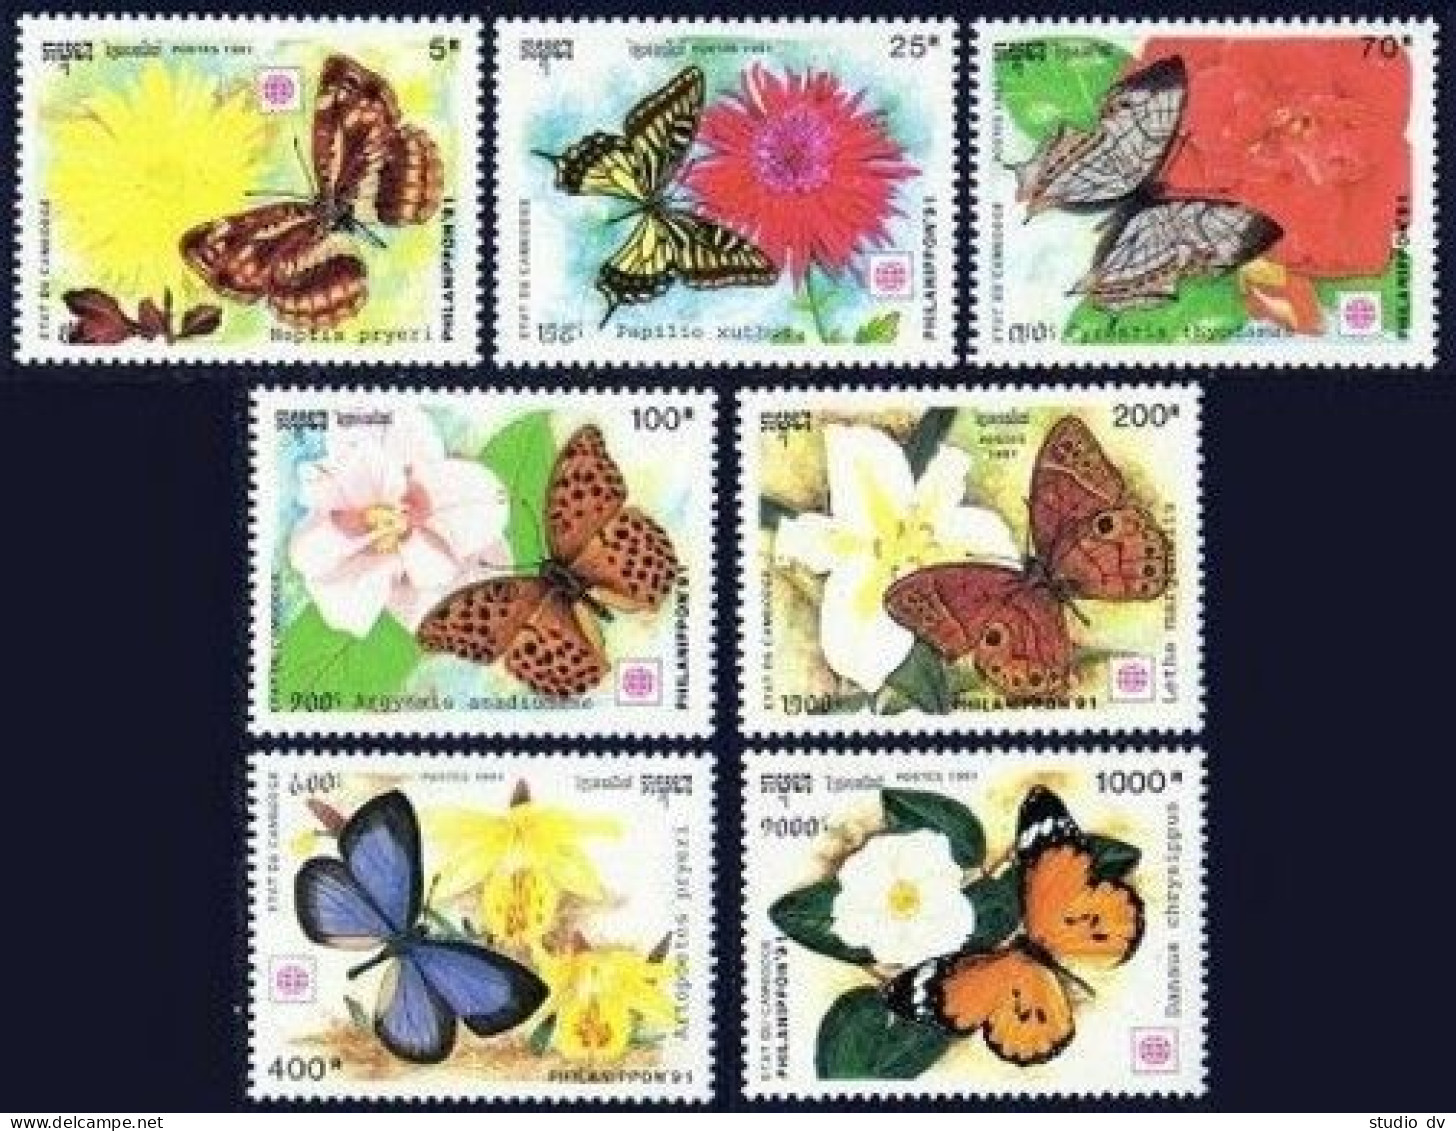 Cambodia 1175-1181,MNH.Michel 1253-1259. PHILANIPPON-1991,Butterflies,Flowers. - Cambodia